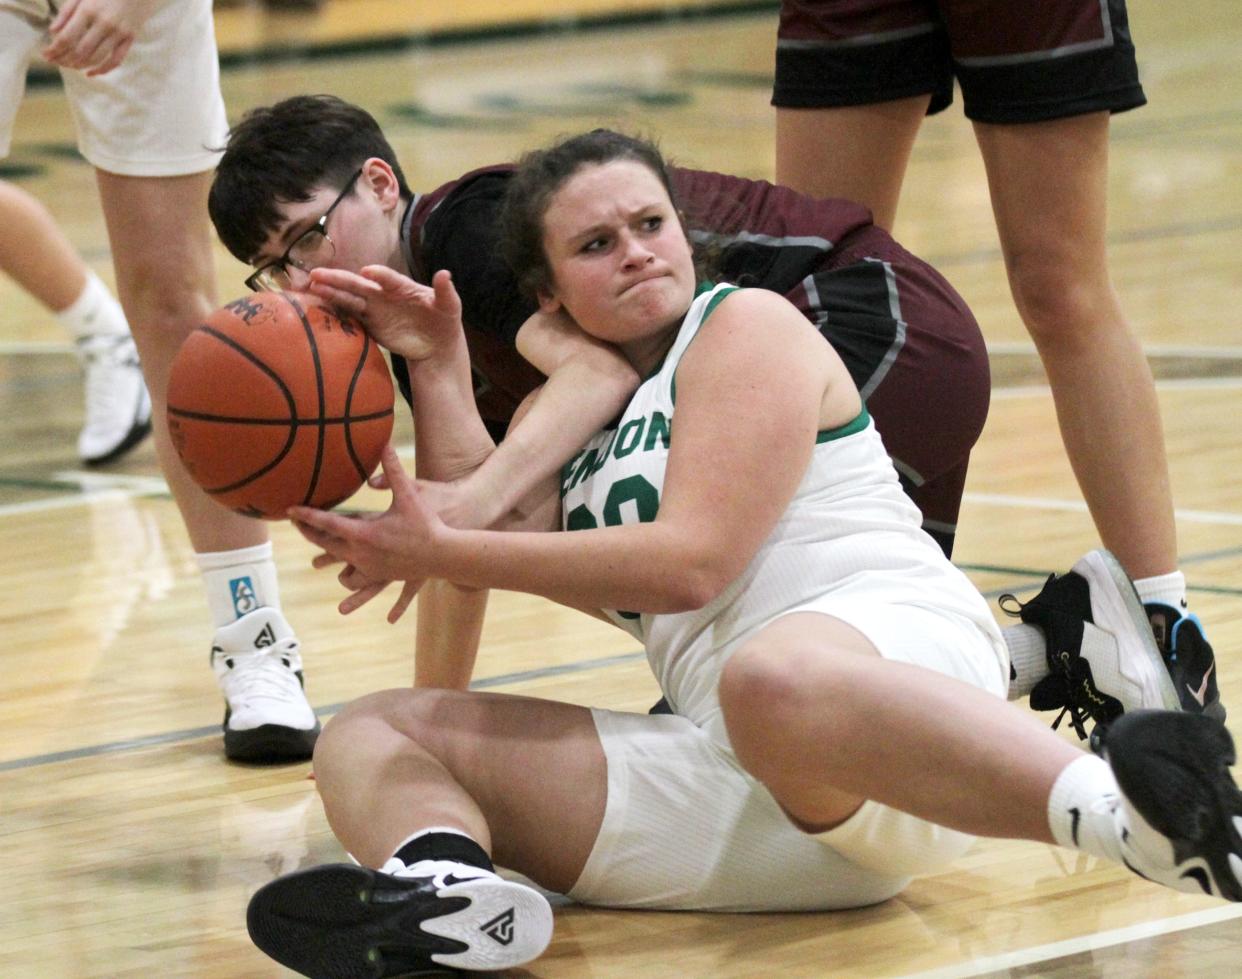 Brianna Heitkamp of Mendon gains possession of a loose ball in the second quarter of the Hornet win over Union City on Tuesday.